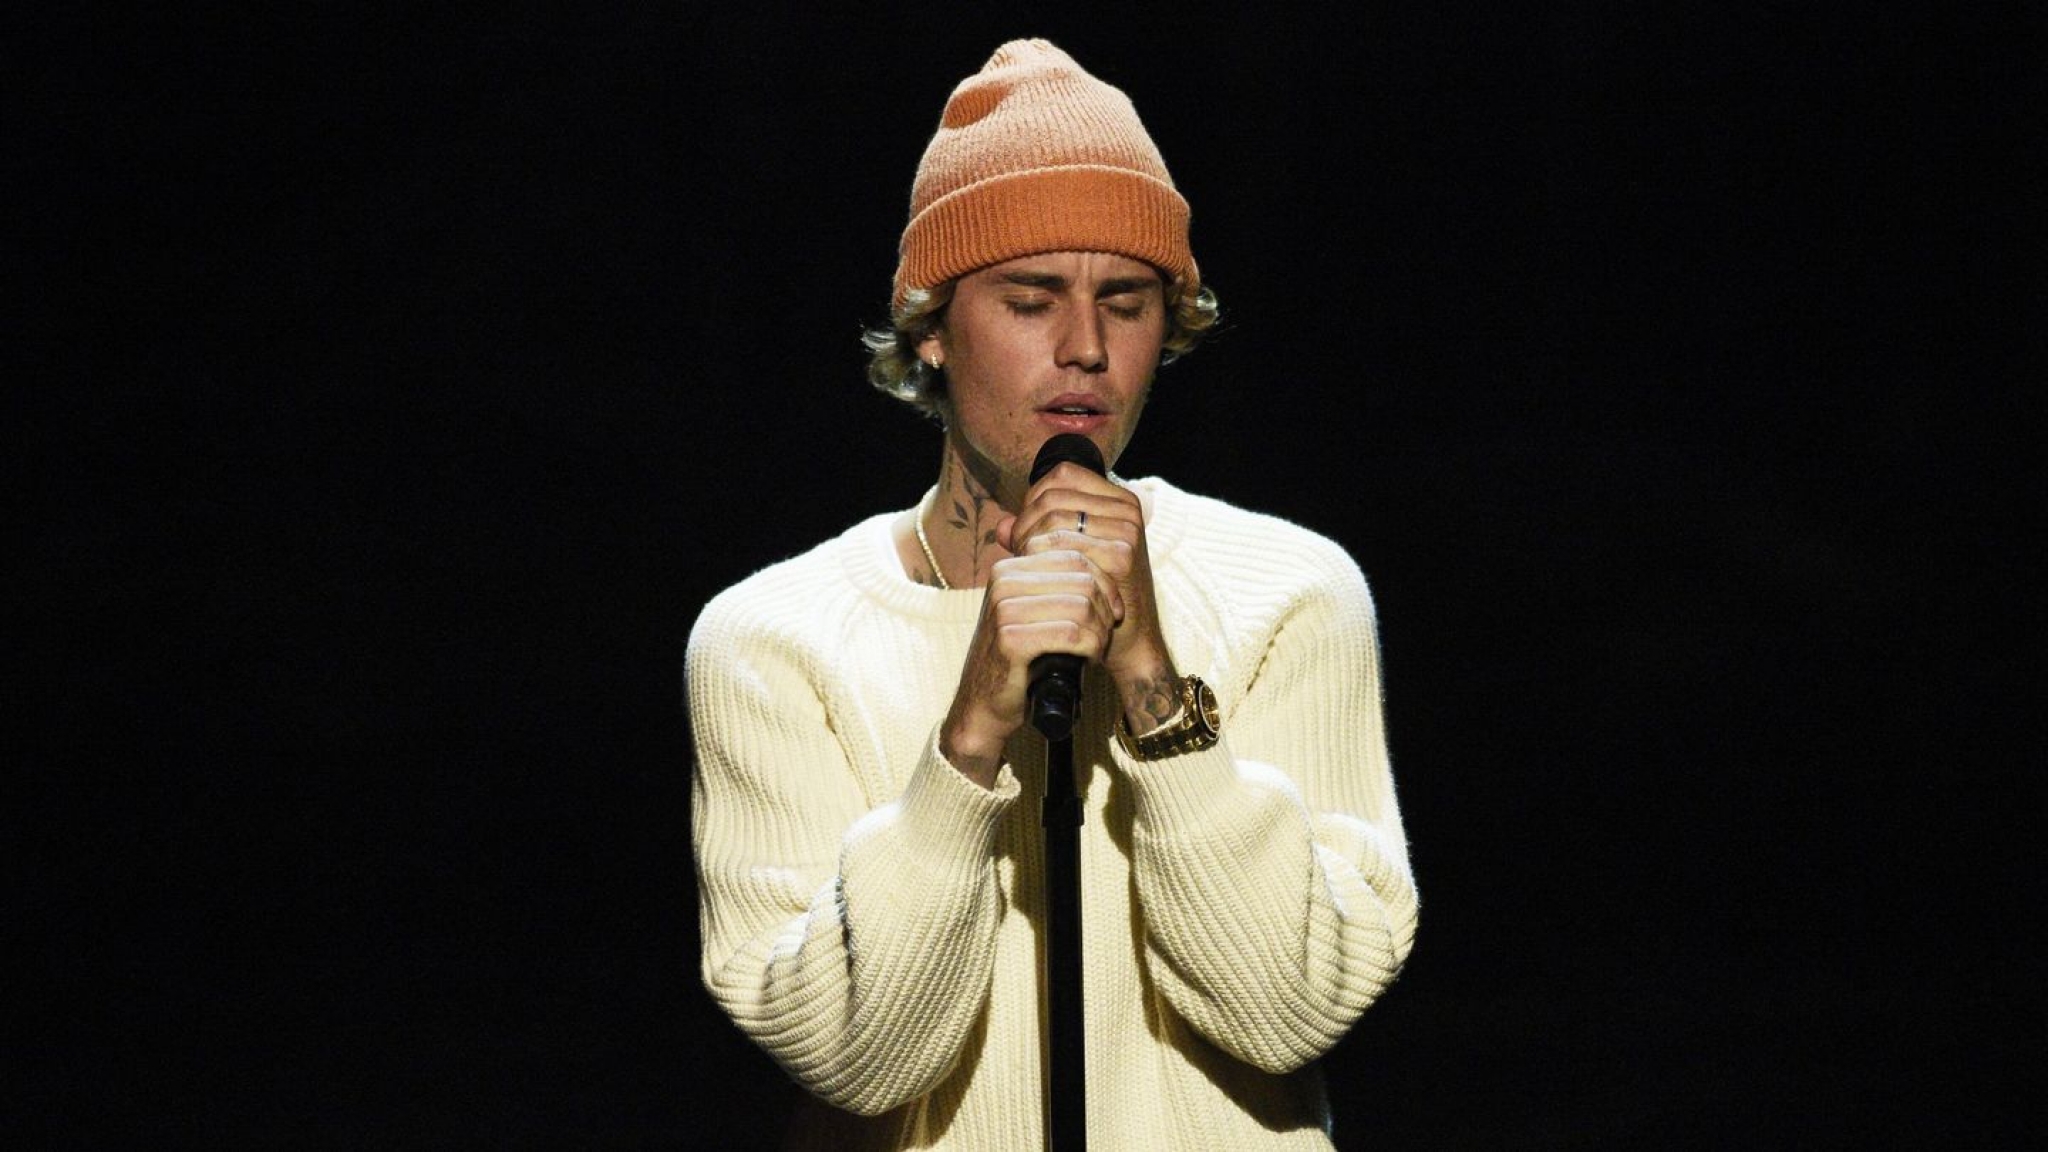 Justin Bieber Finds New Meaning In Life On Surprise EP Freedom.